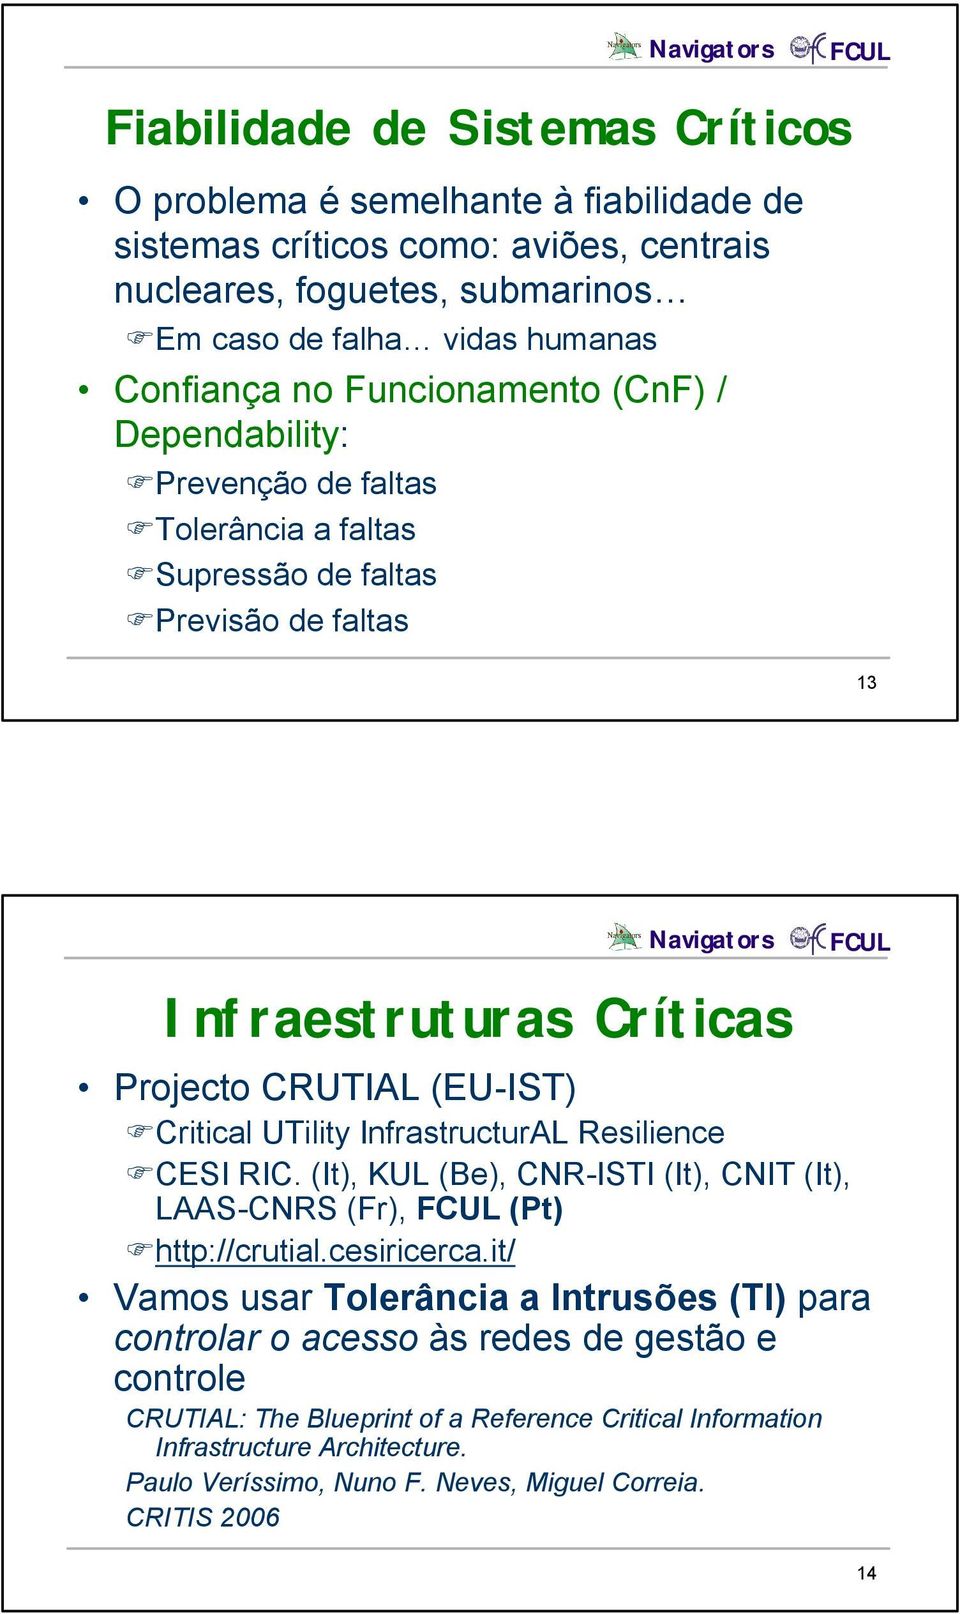 UTility InfrastructurAL Resilience CESI RIC. (It), KUL (Be), CNR-ISTI (It), CNIT (It), LAAS-CNRS (Fr), (Pt) http://crutial.cesiricerca.